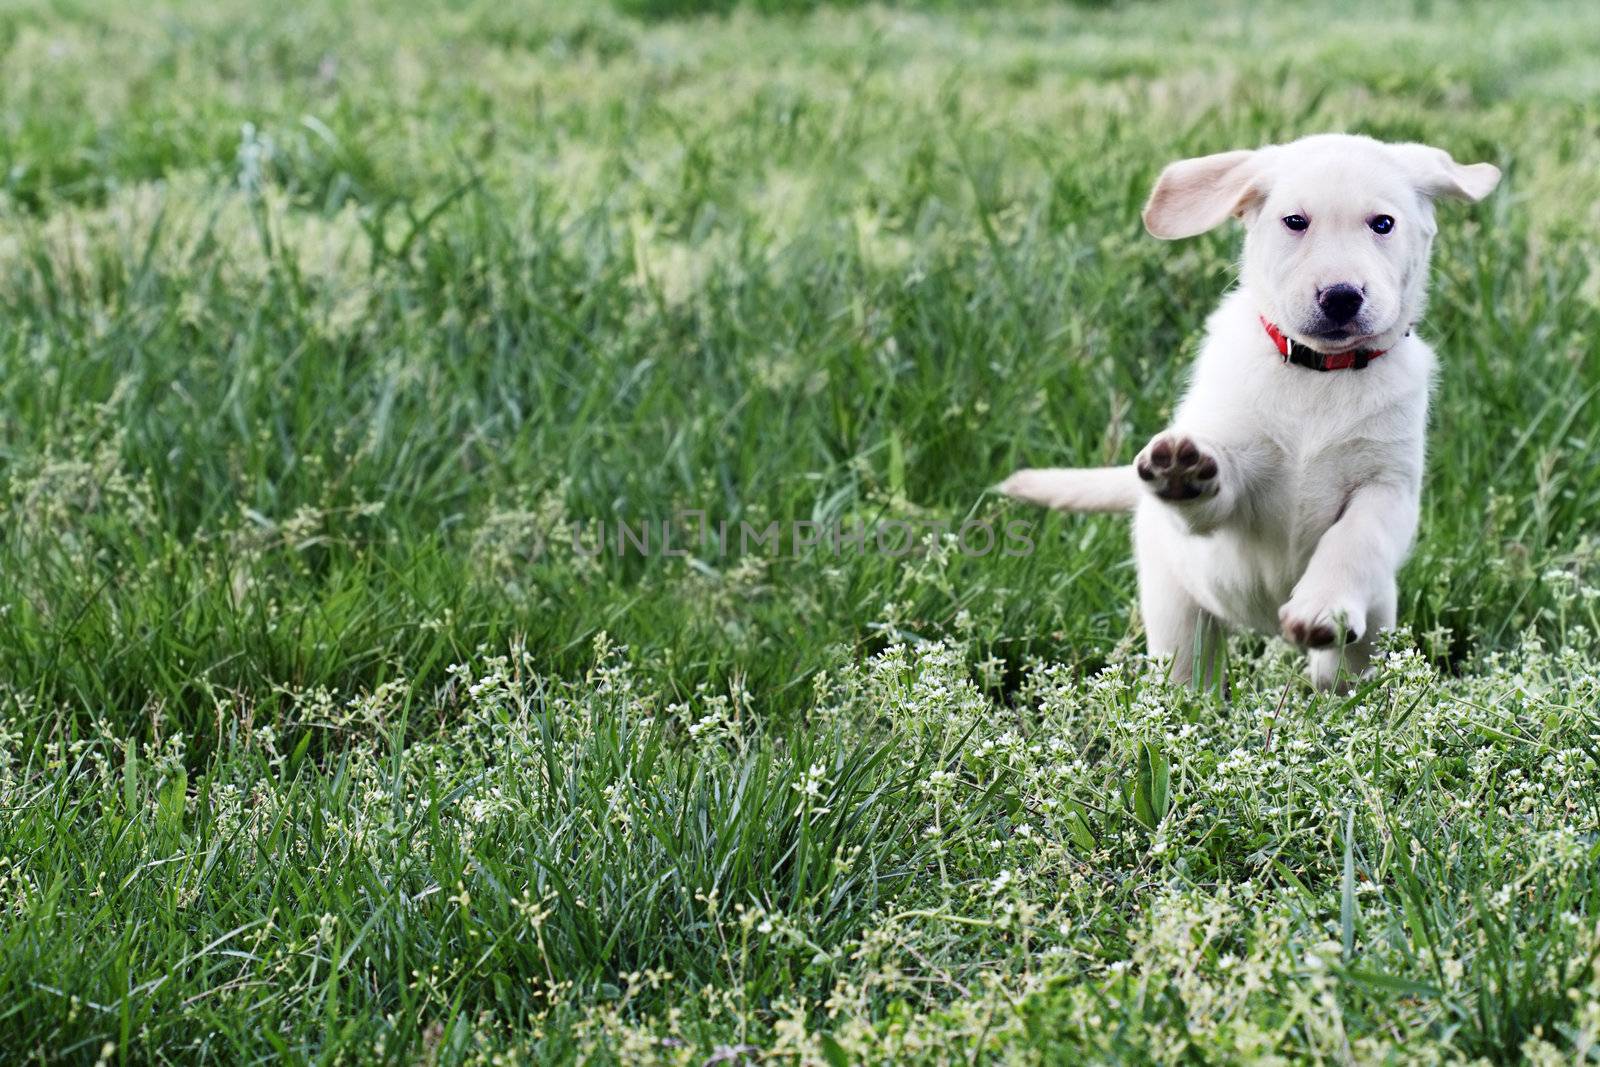 Cloud, an English Cream Labrador Retriever - Golden Retriever mixed designer breed 7 week old puppy,  running and playing in a field. Extreme shallow depth of field with selective focus on puppies face.